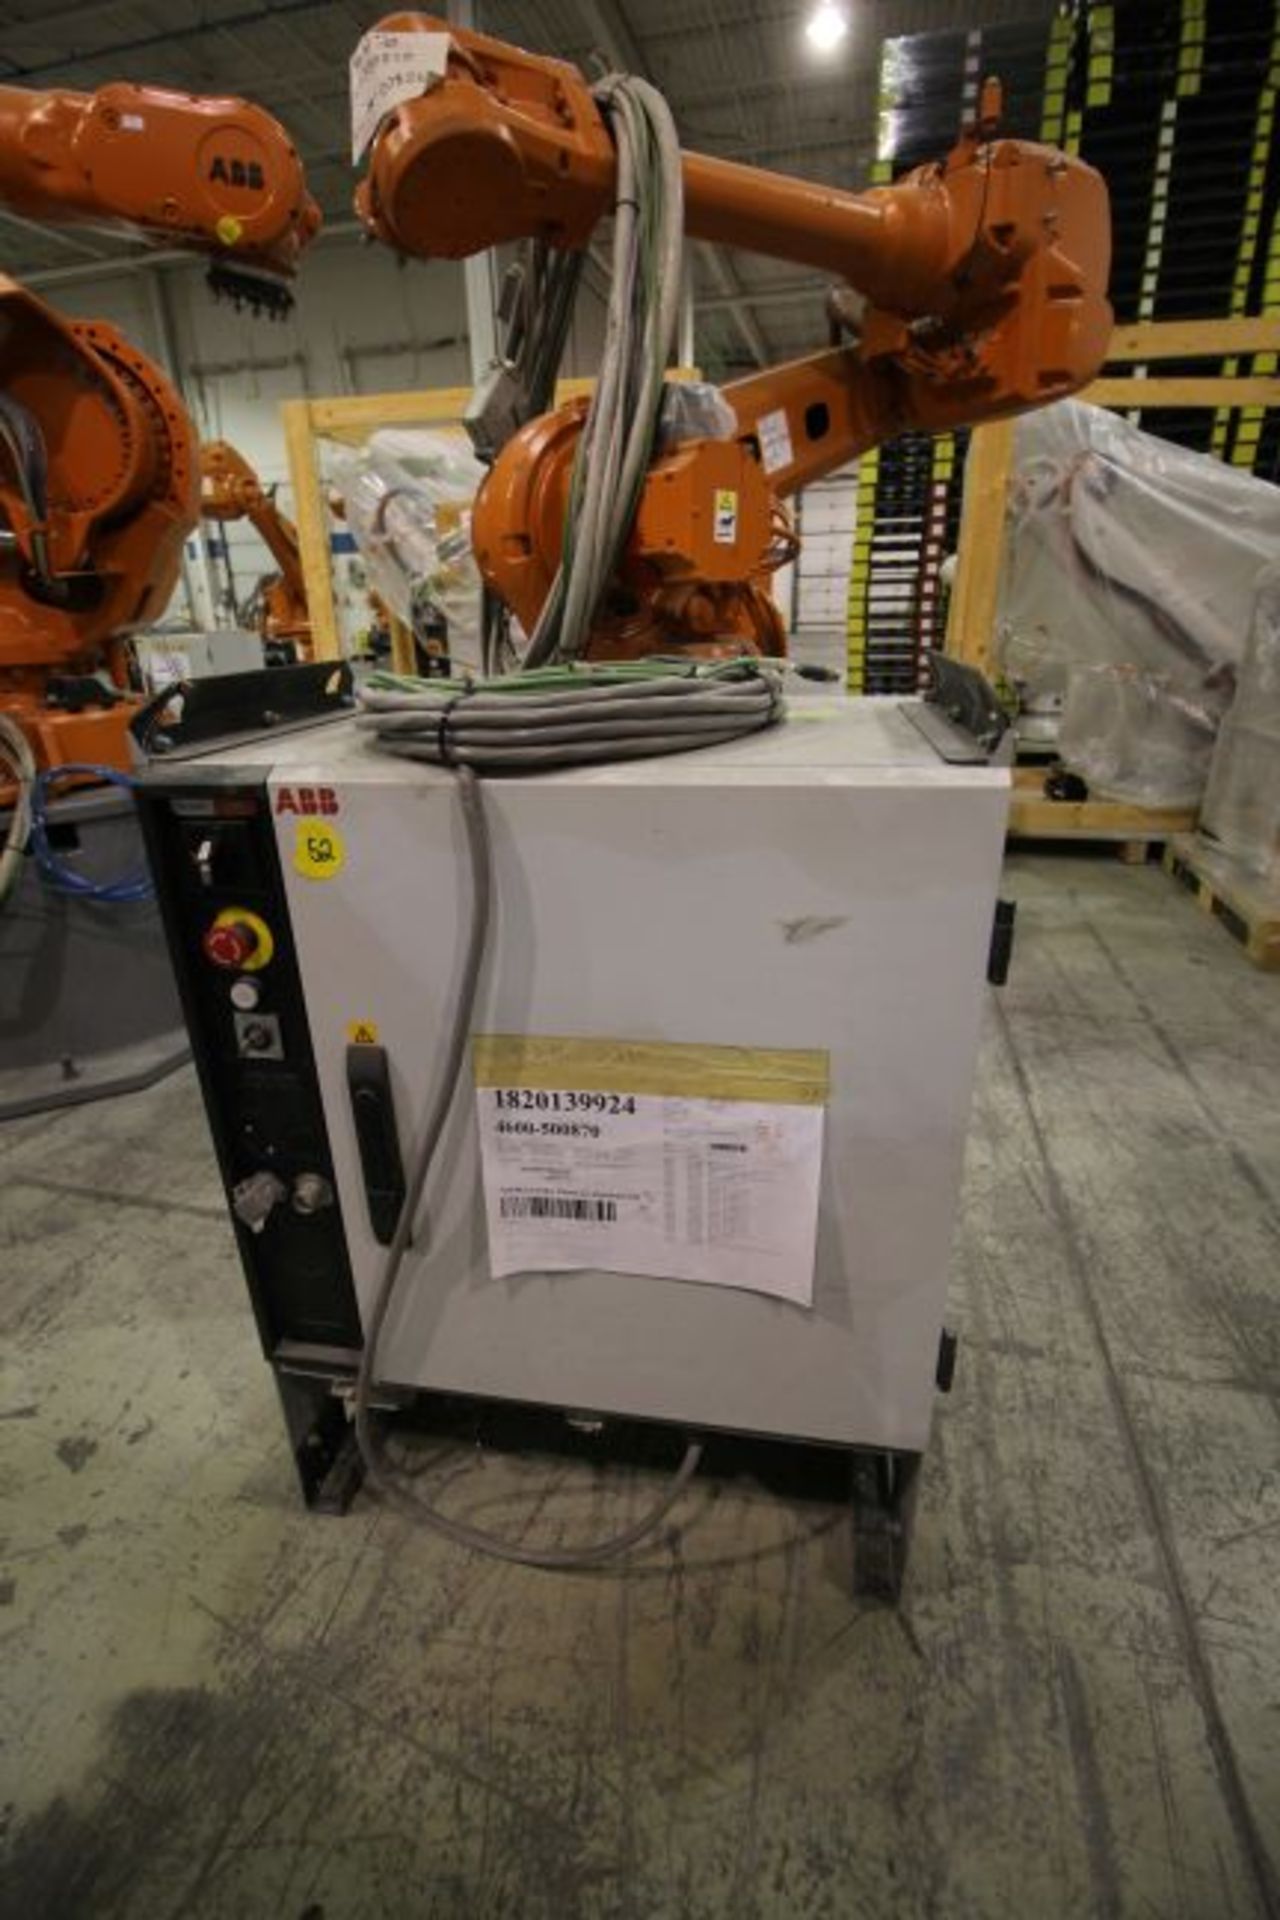 ABB ROBOT IRB 4600 2.55/40KG WITH IRC5 CONTROLS, YEAR 2014, SN 500870 TEACH PENDANT& CABLES - Image 6 of 10